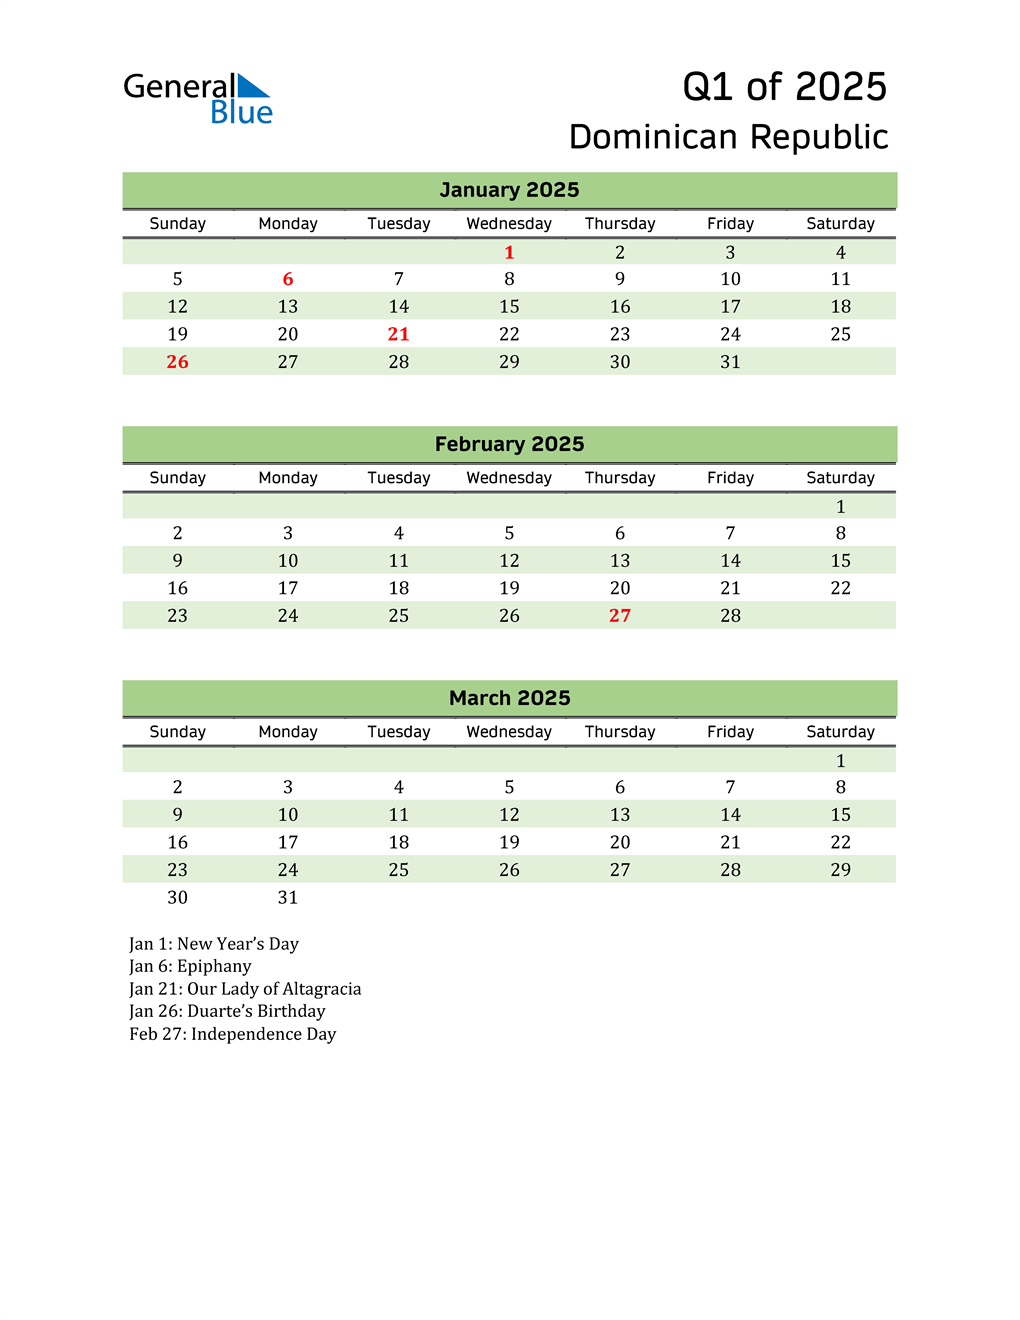  Quarterly Calendar 2025 with Dominican Republic Holidays 